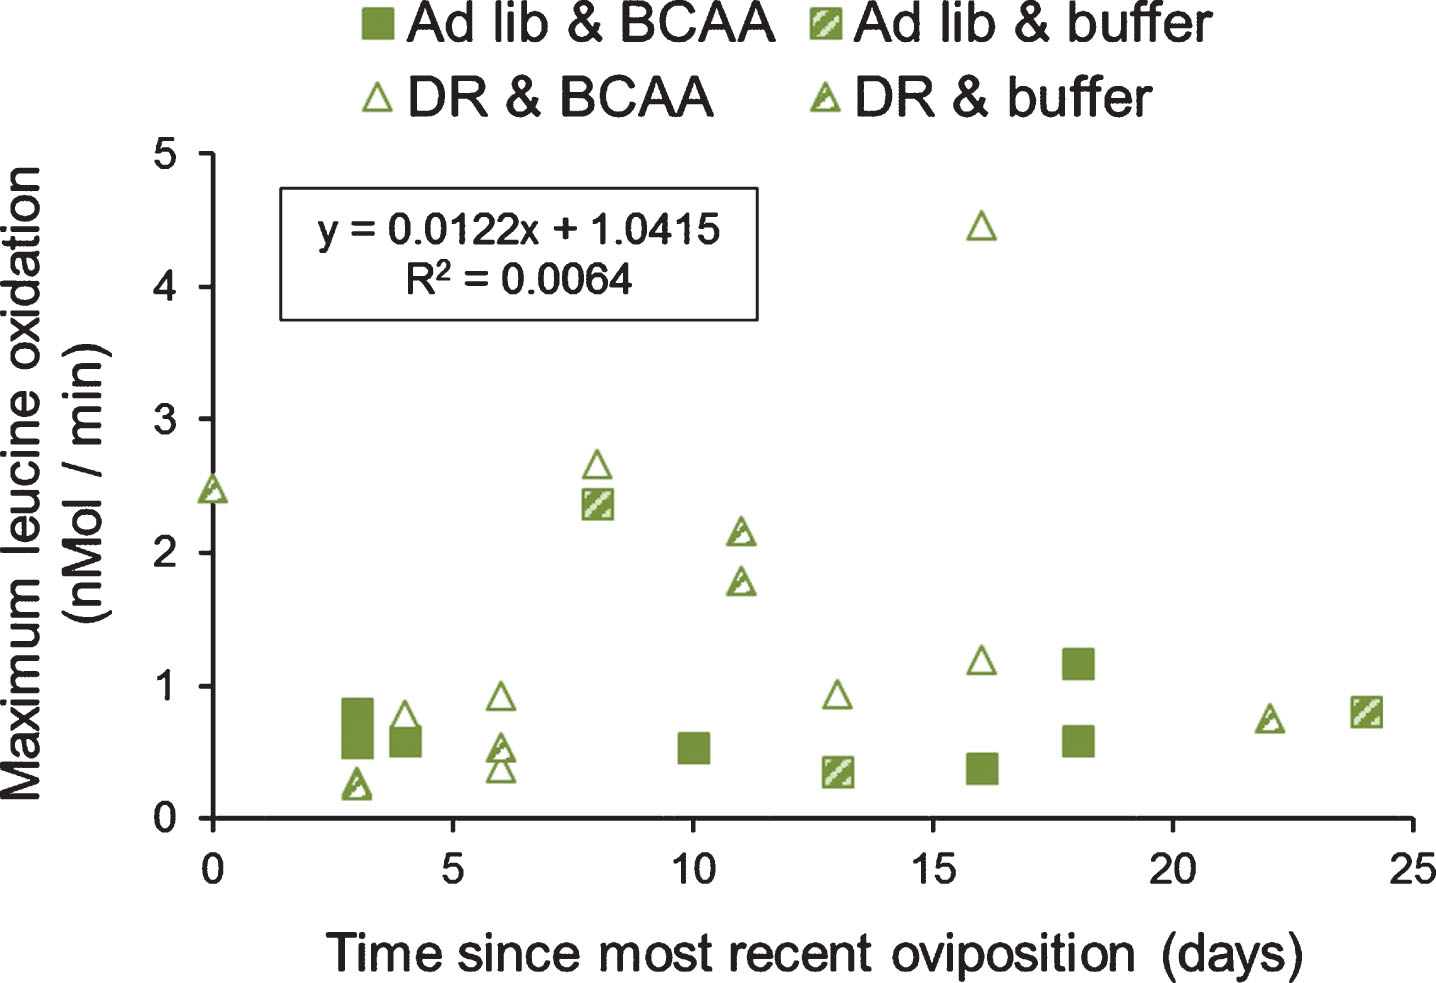 Association of organismal oxidation of leucine and time since most recent oviposition, in grasshoppers. Grasshoppers were reared upon ad libitum or DR lettuce feeding and supplementation with BCAAs or buffer. There was no association of the amount of BCAA oxidized and the moment in the grasshopper’s egg production cycle (R2 = 0.0064, using Excel curve fitting).